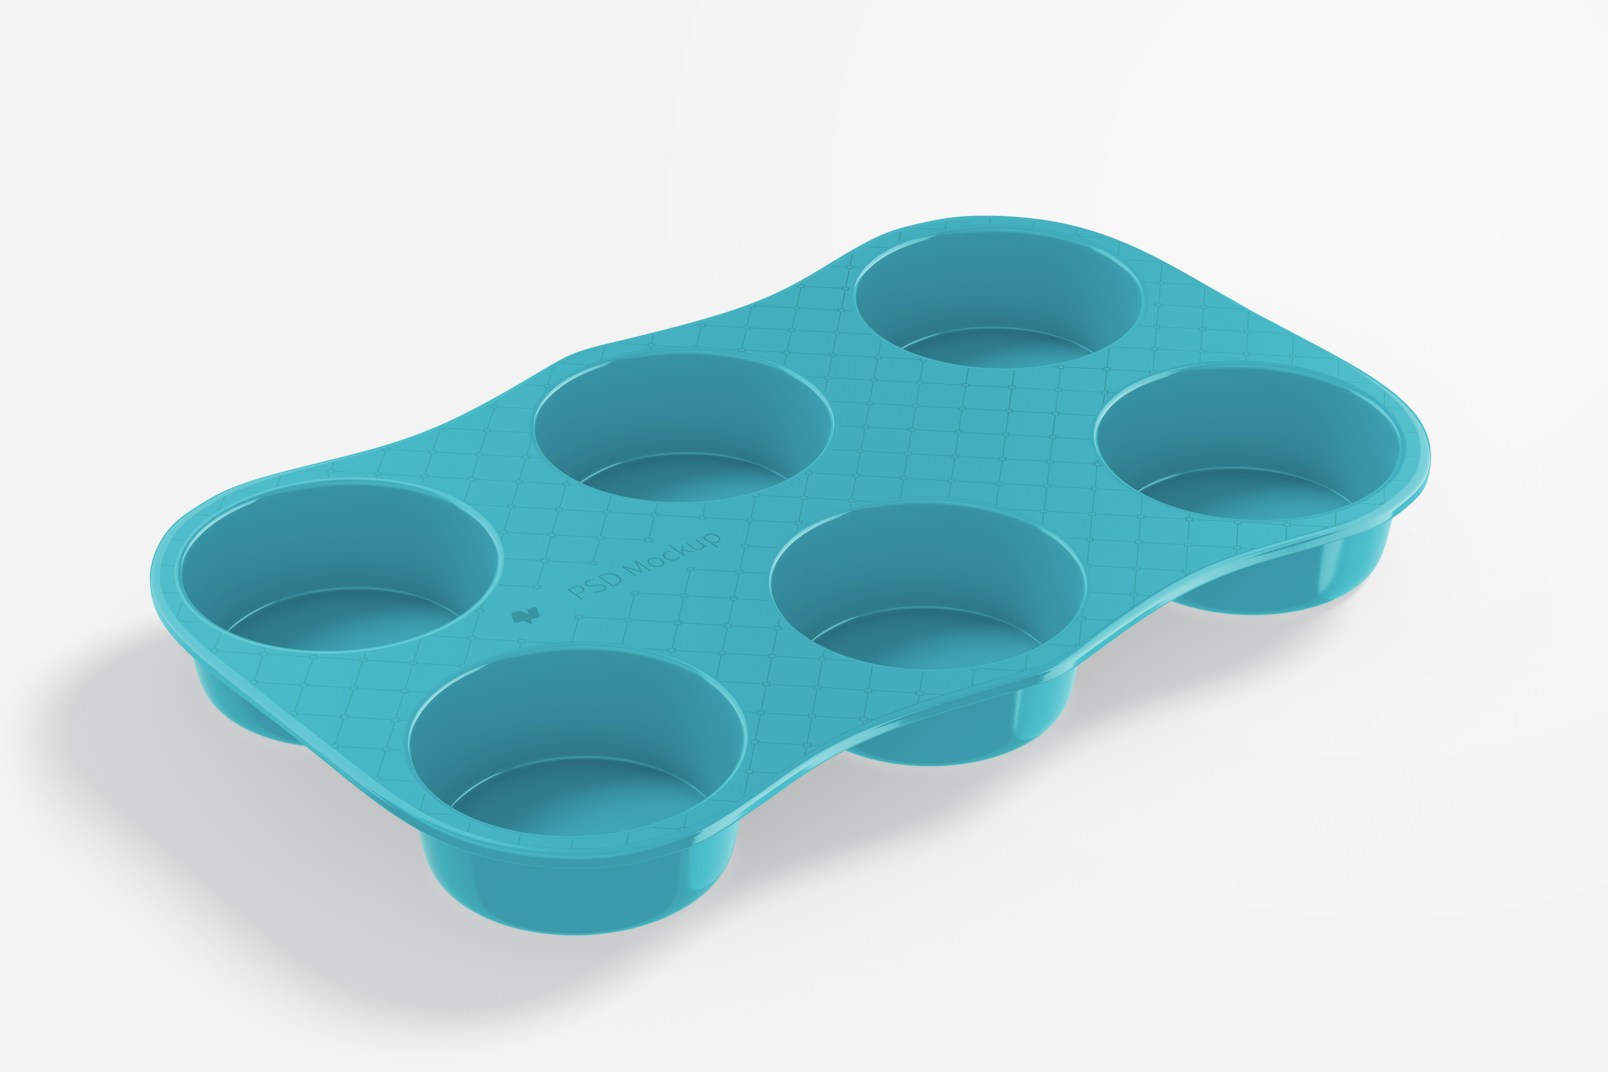 Porcelain Muffin Pan Mockup, Perspective